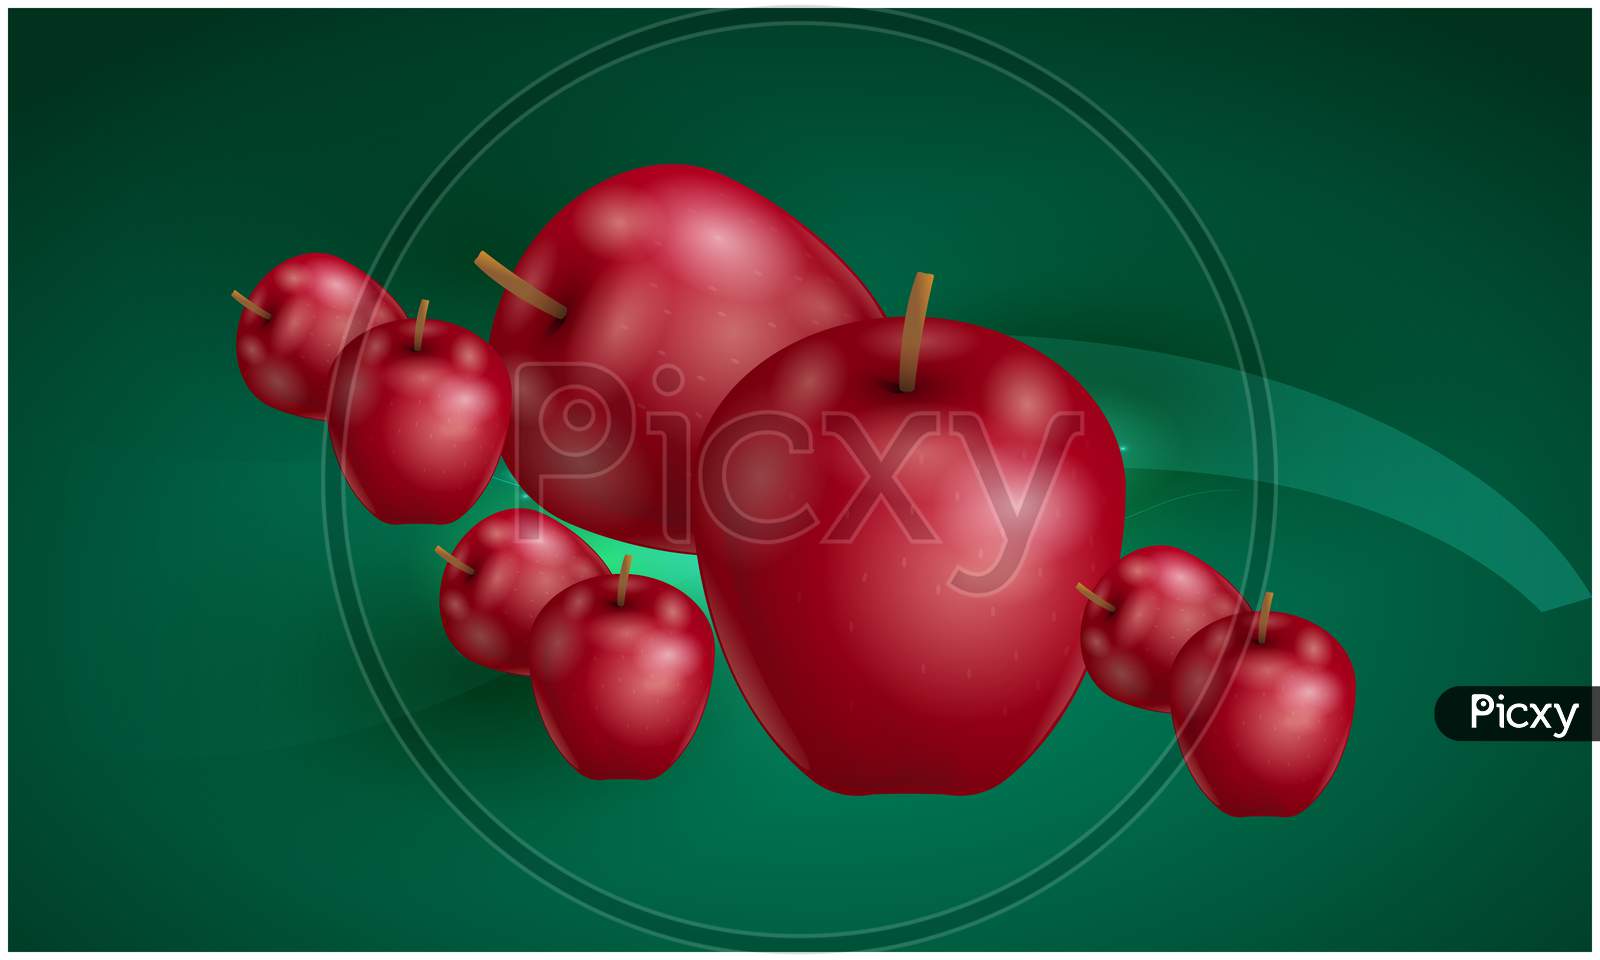 Mock Up Illustration Of Real Apple On Abstract Background